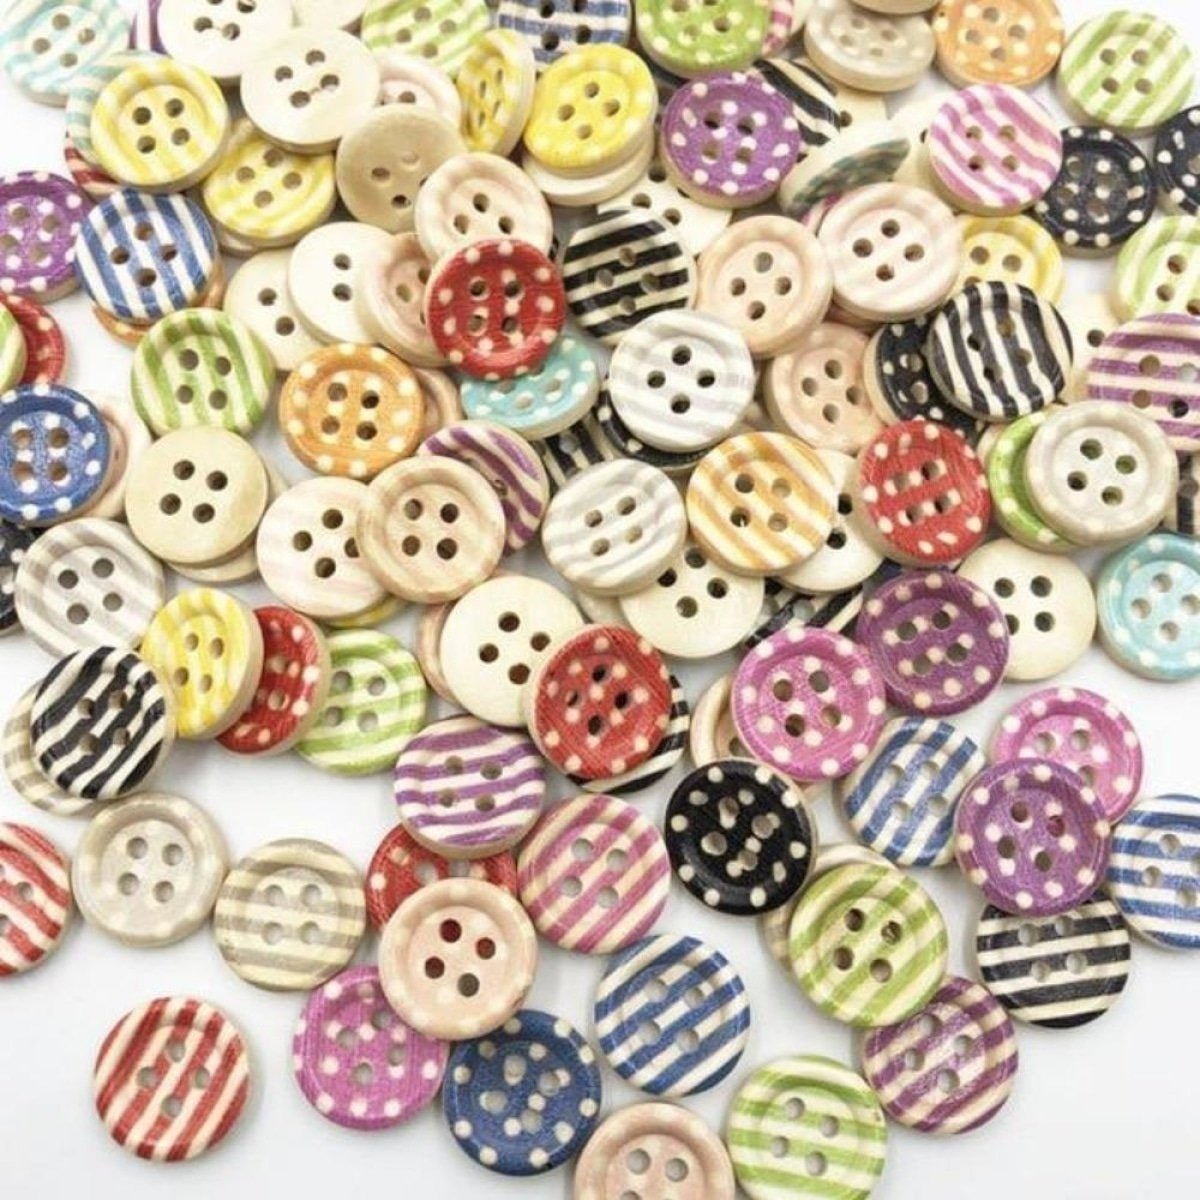 100pcs Mixed Wooden Buttons Flower for Clothing Craft Sewing DIY 2 Hole 15mm - Stripes & Dots - - Asia Sell